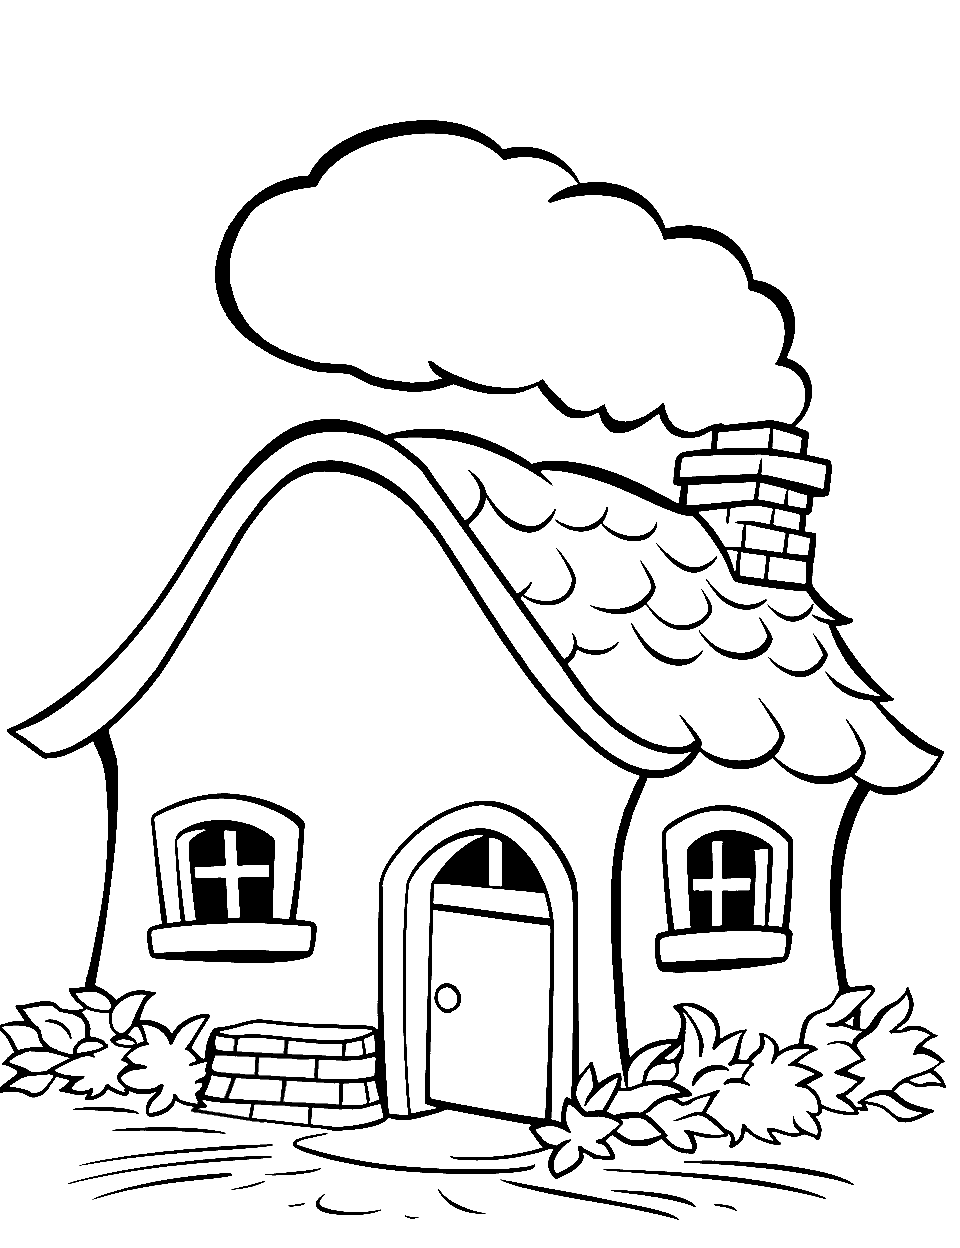 Irish Cottage with a Thatched Roof Coloring Page - A traditional Irish cottage with smoke coming out of the chimney.